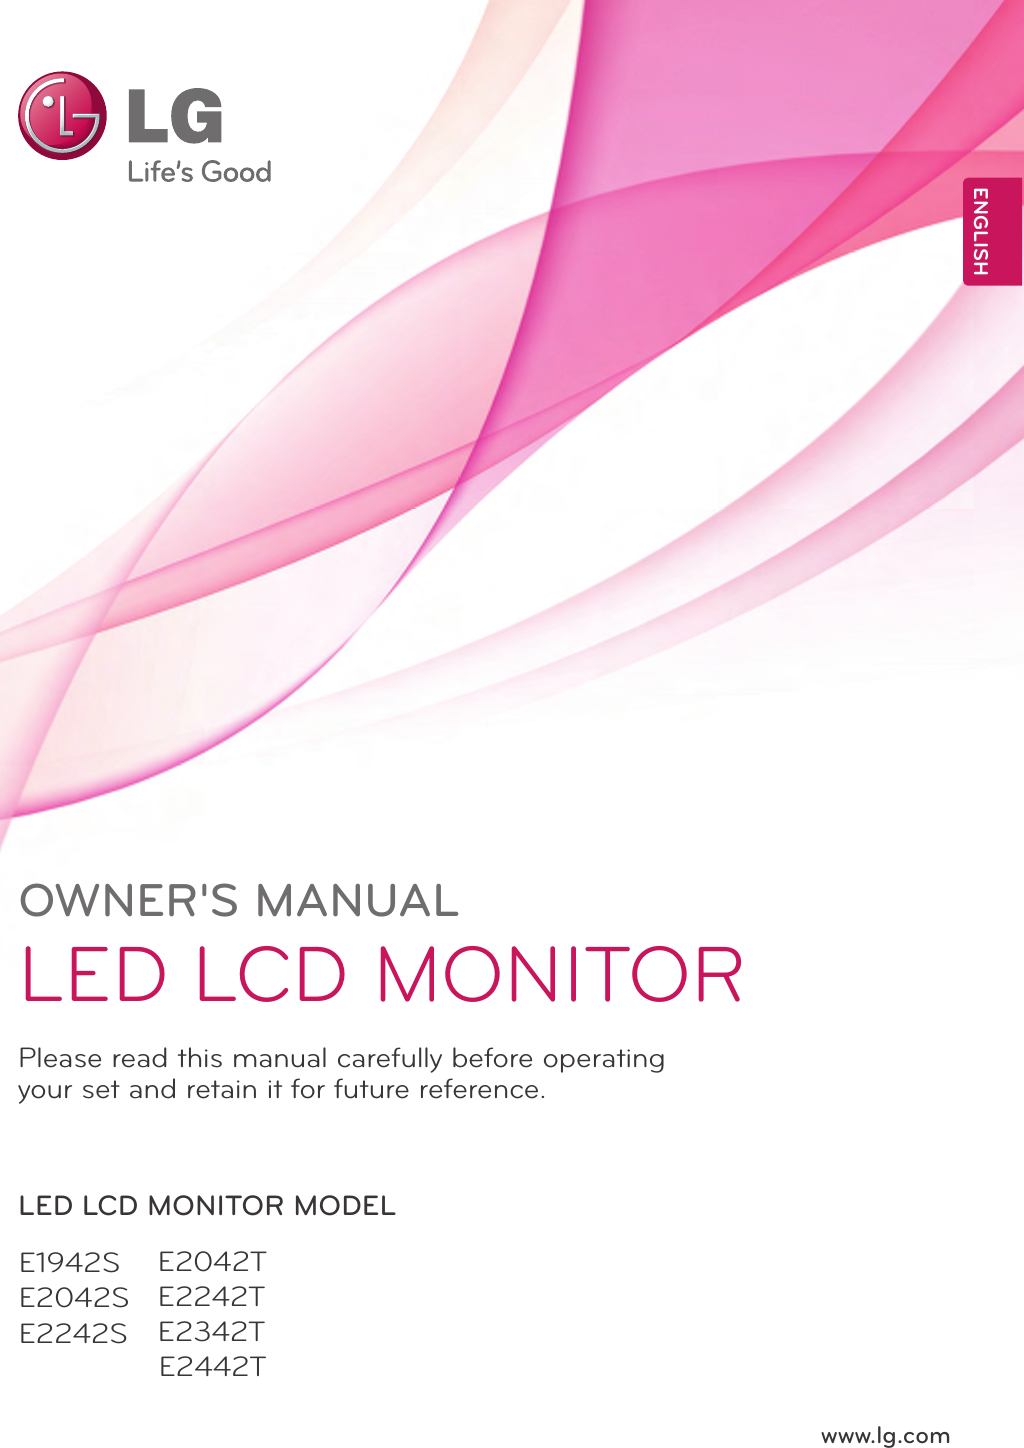 www.lg.comOWNER&apos;S MANUALLED LCD MONITORPlease read this manual carefully before operating your set and retain it for future reference.LED LCD MONITOR MODELENGLISH E1942SE2042SE2242S E2042TE2242TE2342T                E2442T 